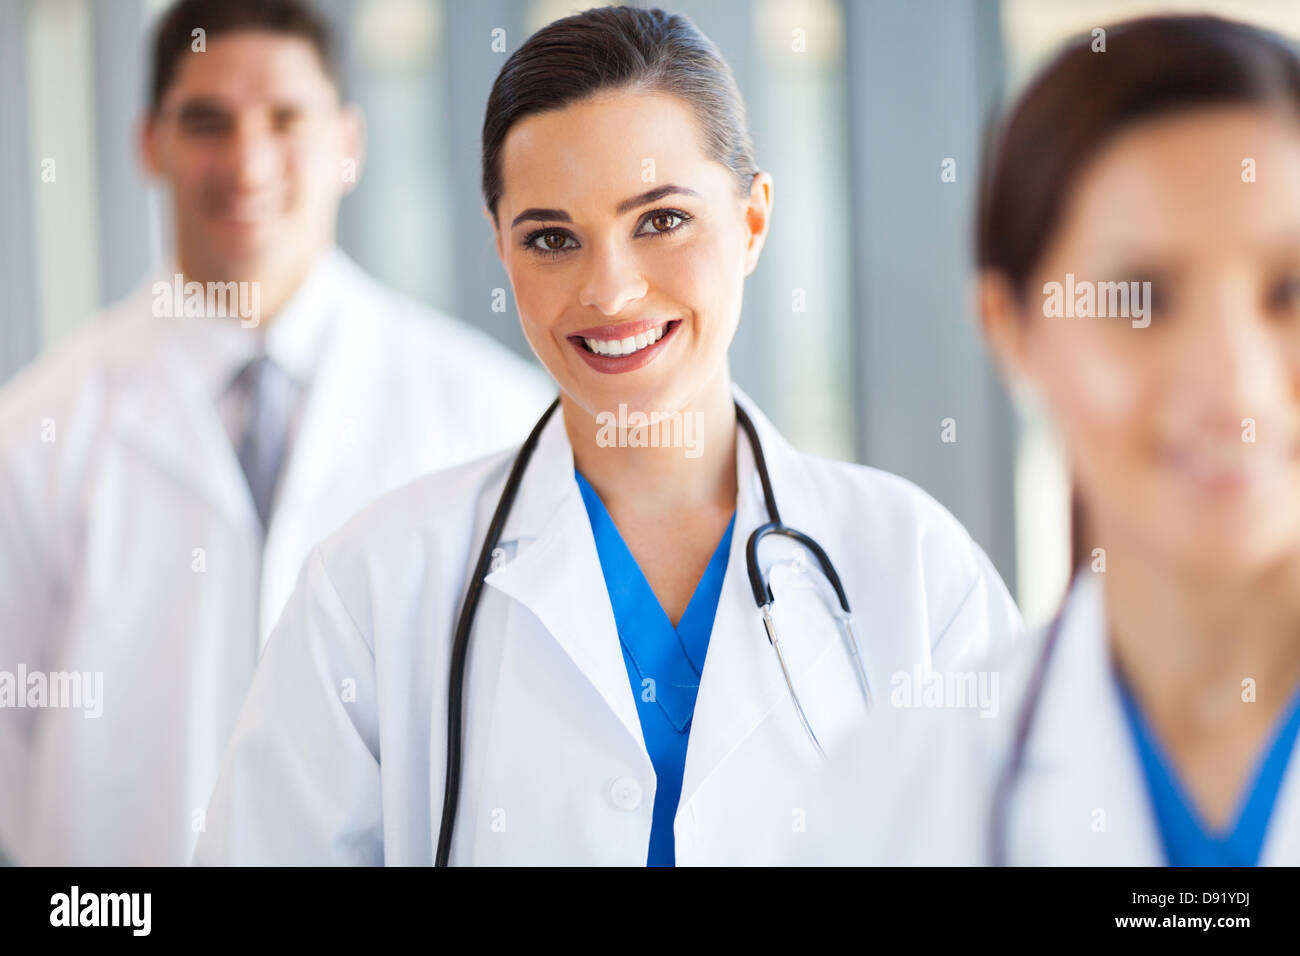 medical team group portrait in hospital Stock Photo